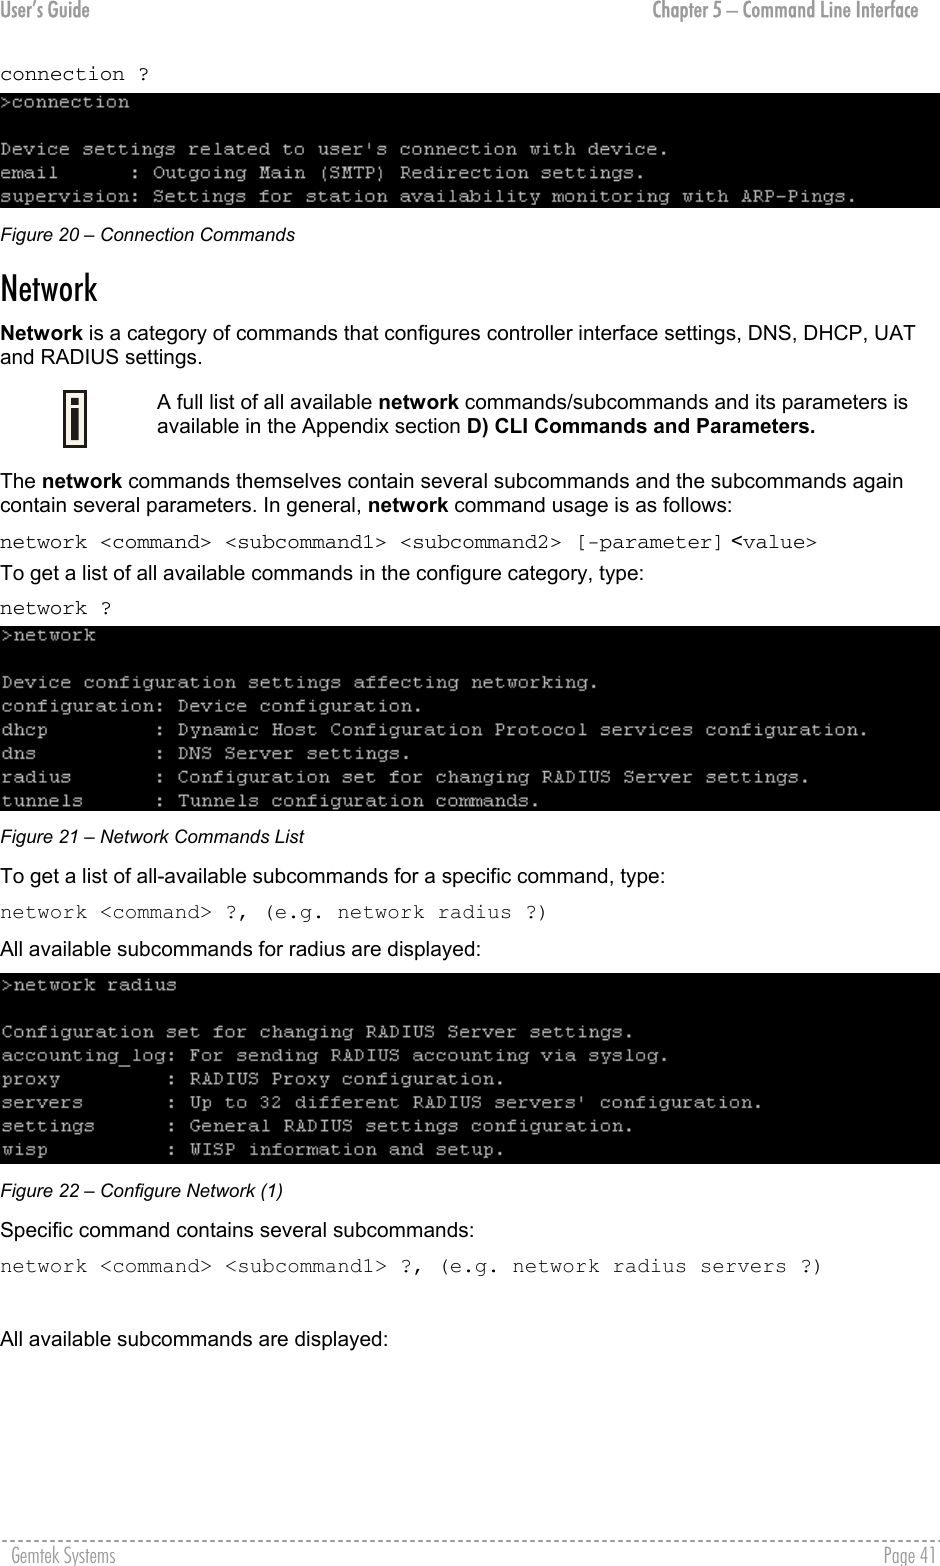 User’s Guide  Chapter 5 – Command Line Interface connection ?  Figure 20 – Connection Commands Network  Network is a category of commands that configures controller interface settings, DNS, DHCP, UAT and RADIUS settings.  A full list of all available network commands/subcommands and its parameters is available in the Appendix section D) CLI Commands and Parameters. The network commands themselves contain several subcommands and the subcommands again contain several parameters. In general, network command usage is as follows:  network &lt;command&gt; &lt;subcommand1&gt; &lt;subcommand2&gt; [-parameter] &lt;value&gt; To get a list of all available commands in the configure category, type:  network ?  Figure 21 – Network Commands List To get a list of all-available subcommands for a specific command, type:  network &lt;command&gt; ?, (e.g. network radius ?) All available subcommands for radius are displayed:  Figure 22 – Configure Network (1) Specific command contains several subcommands: network &lt;command&gt; &lt;subcommand1&gt; ?, (e.g. network radius servers ?)  All available subcommands are displayed:  Gemtek Systems    Page 41  